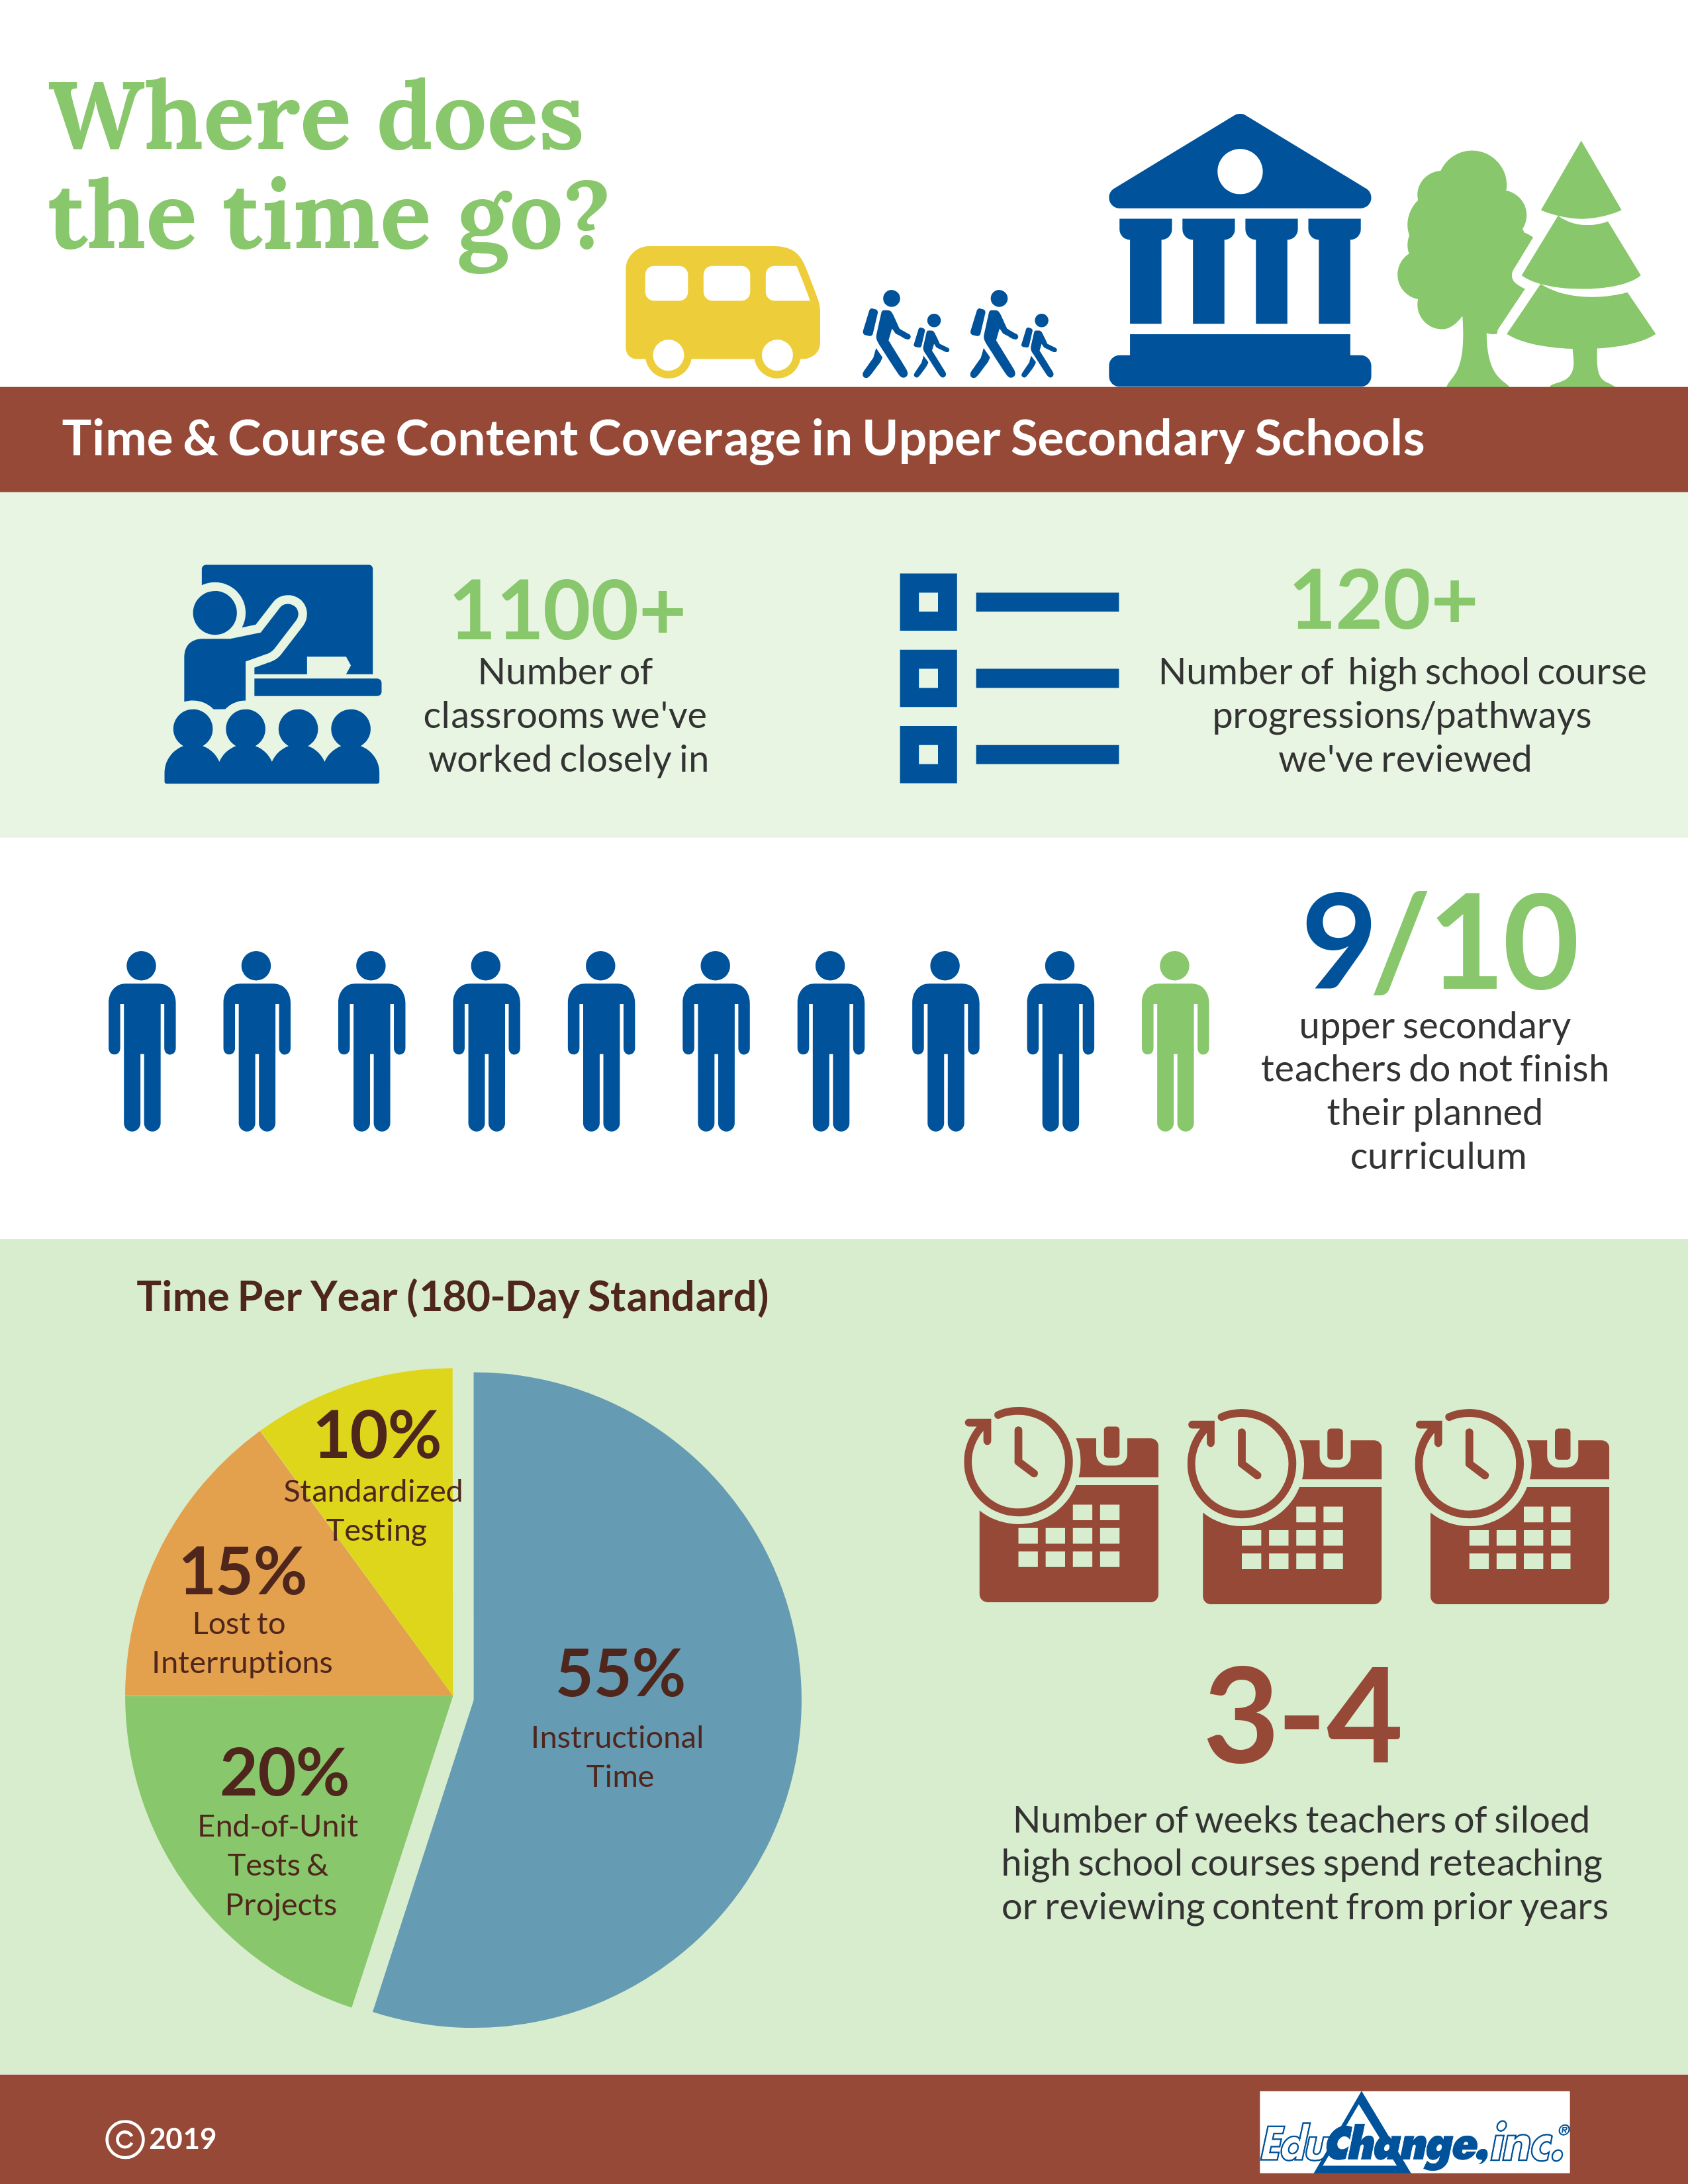 This infographic shows Time and Course Content Coverage in Upper Secondary Schools. After working in over 1100 classrooms and viewing over 120 high school course progressions/pathways, we note the following: 9 of 10 upper secondary teachers do not finish their planned curriculum; teachers in siloed courses spend 3-4 weeks reteaching content from prior years. Also included is a pie chart that shows how much time is spent per 180-day standard school year: 55% instructional time, 20% end-of-unit tests and projects, 15% lost to interruptions, 10% standardized testing.